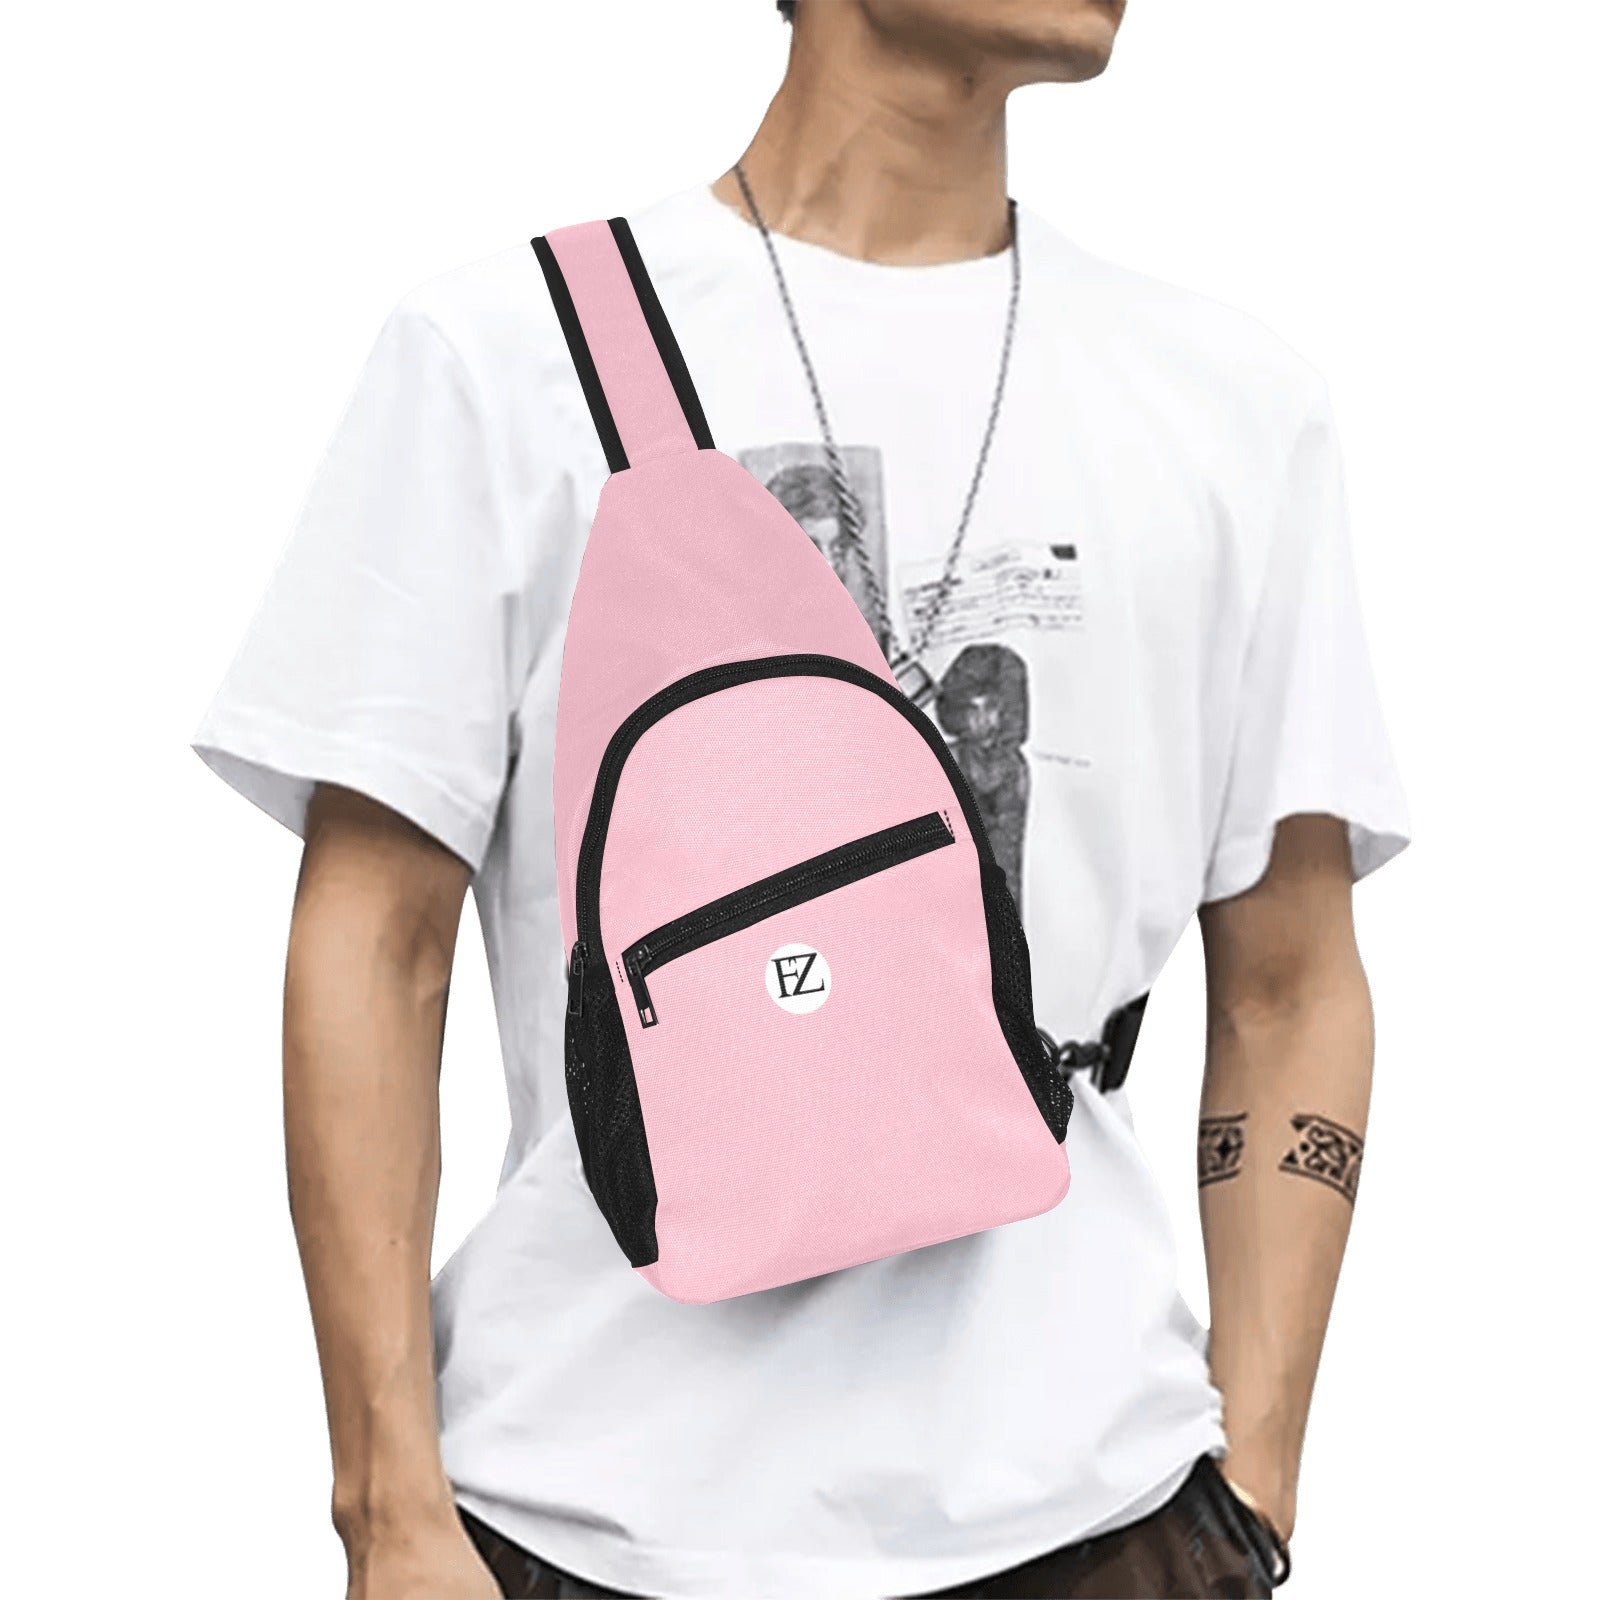 fz men's chest bag too one size / fz chest bag-pink all over print chest bag(model1719)